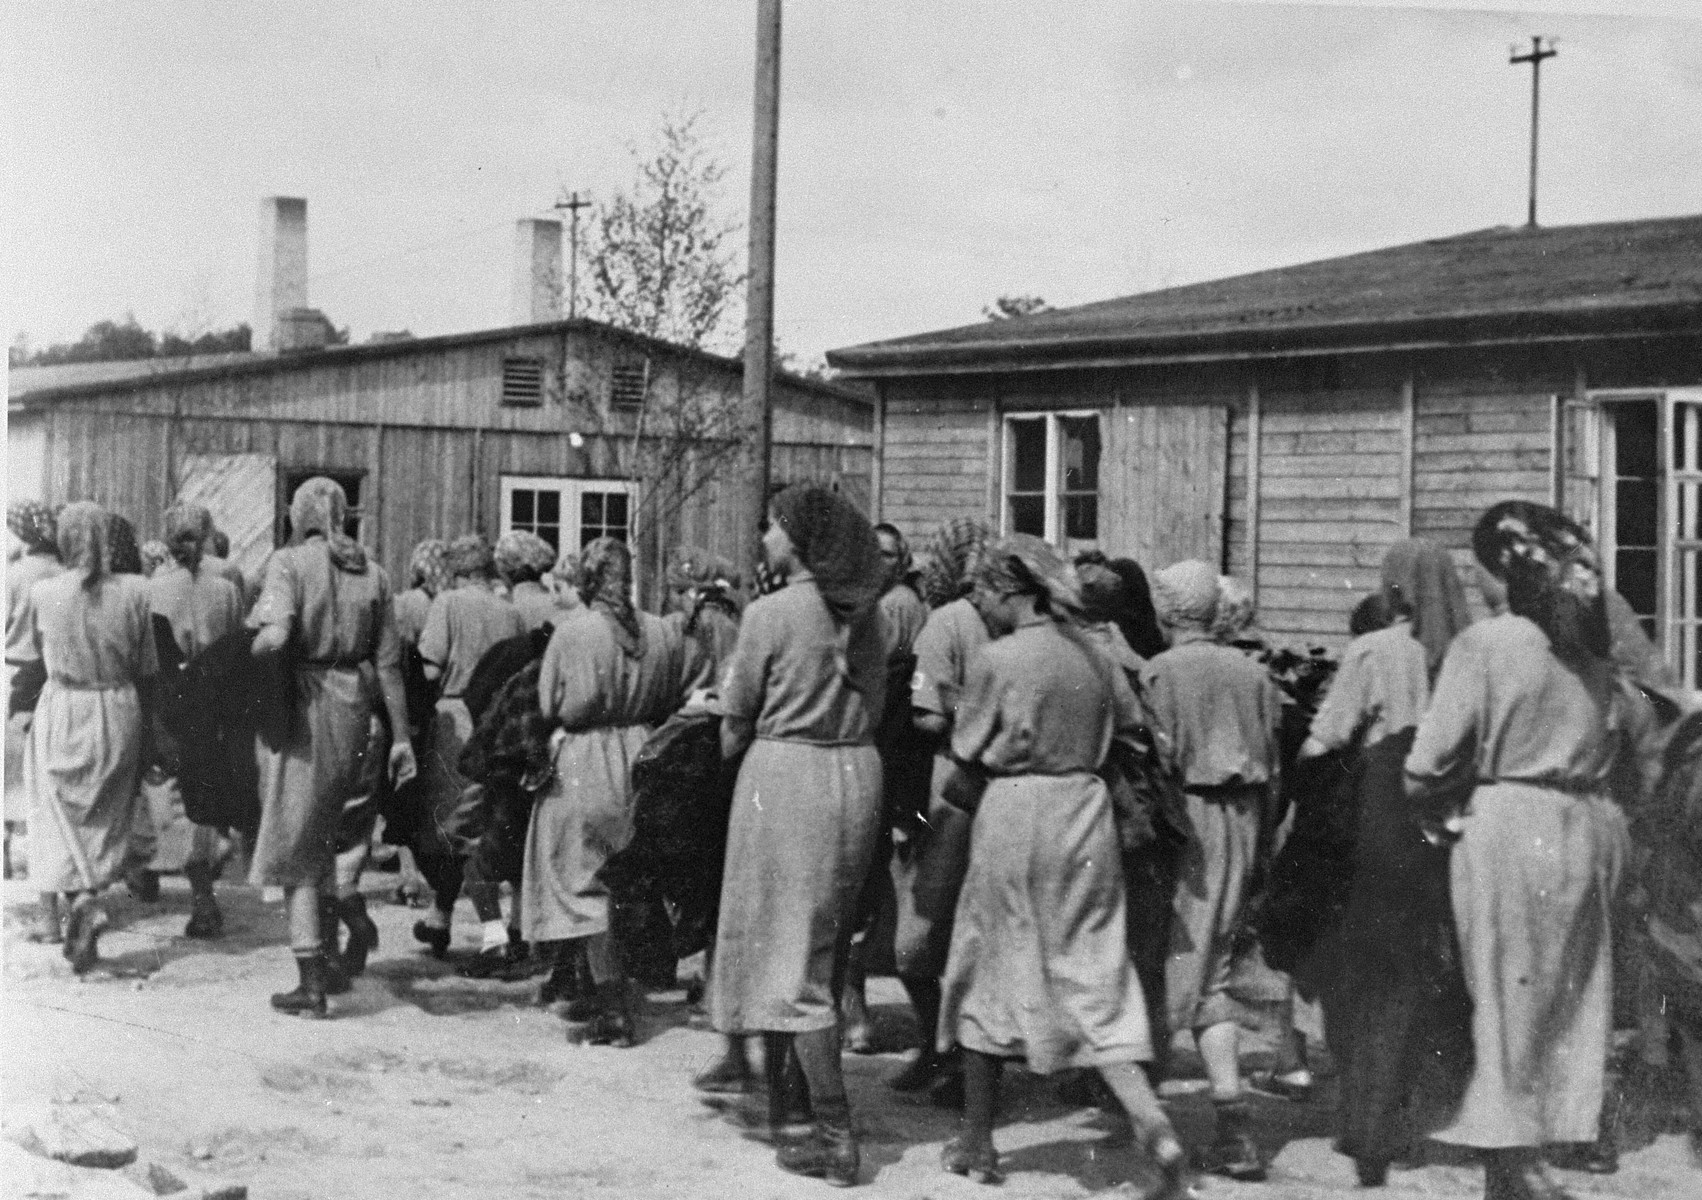 Jewish women from Subcarpathian Rus who have been selected for forced labor at Auschwitz-Birkenau, march toward their barracks after disinfection and headshaving.